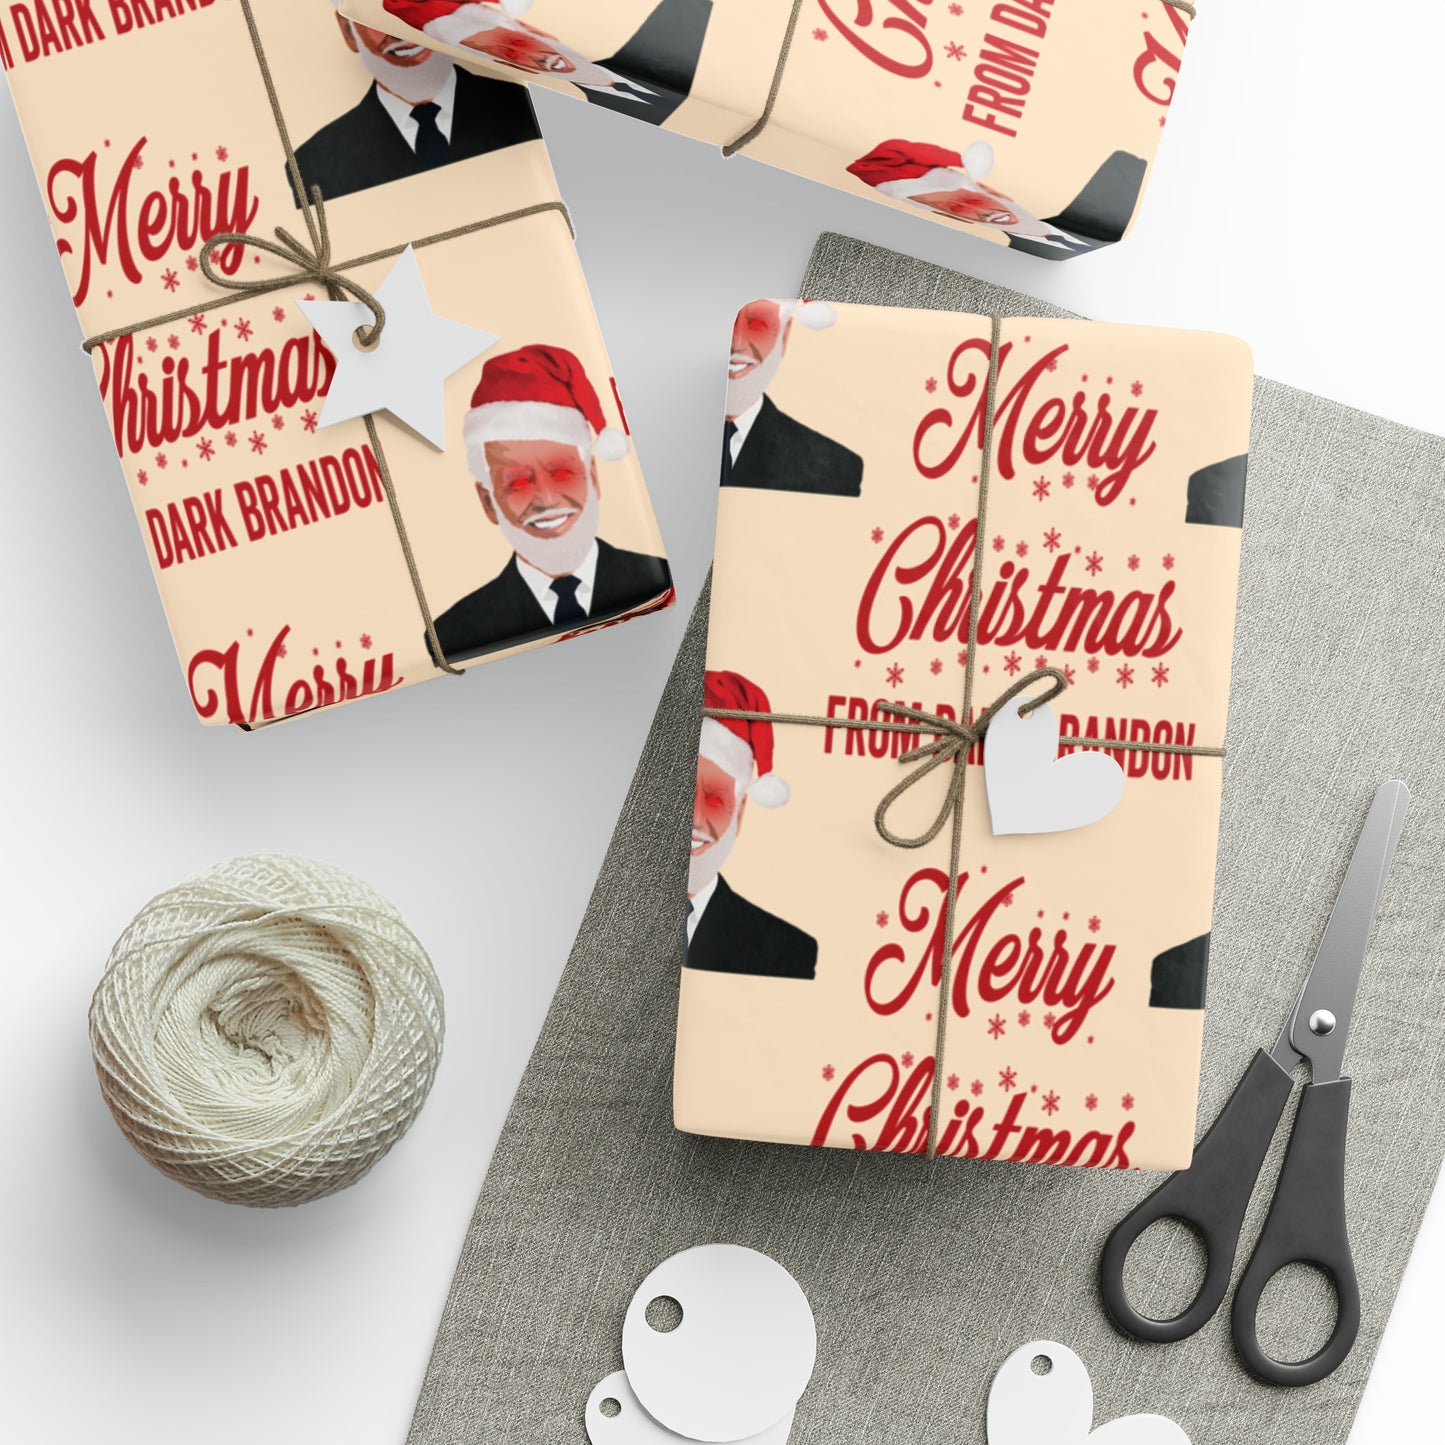 Merry Christmas from Dark Brandon Christmas Wrapping Paper for Gifts - Pro Biden Brandon Gift Wrap